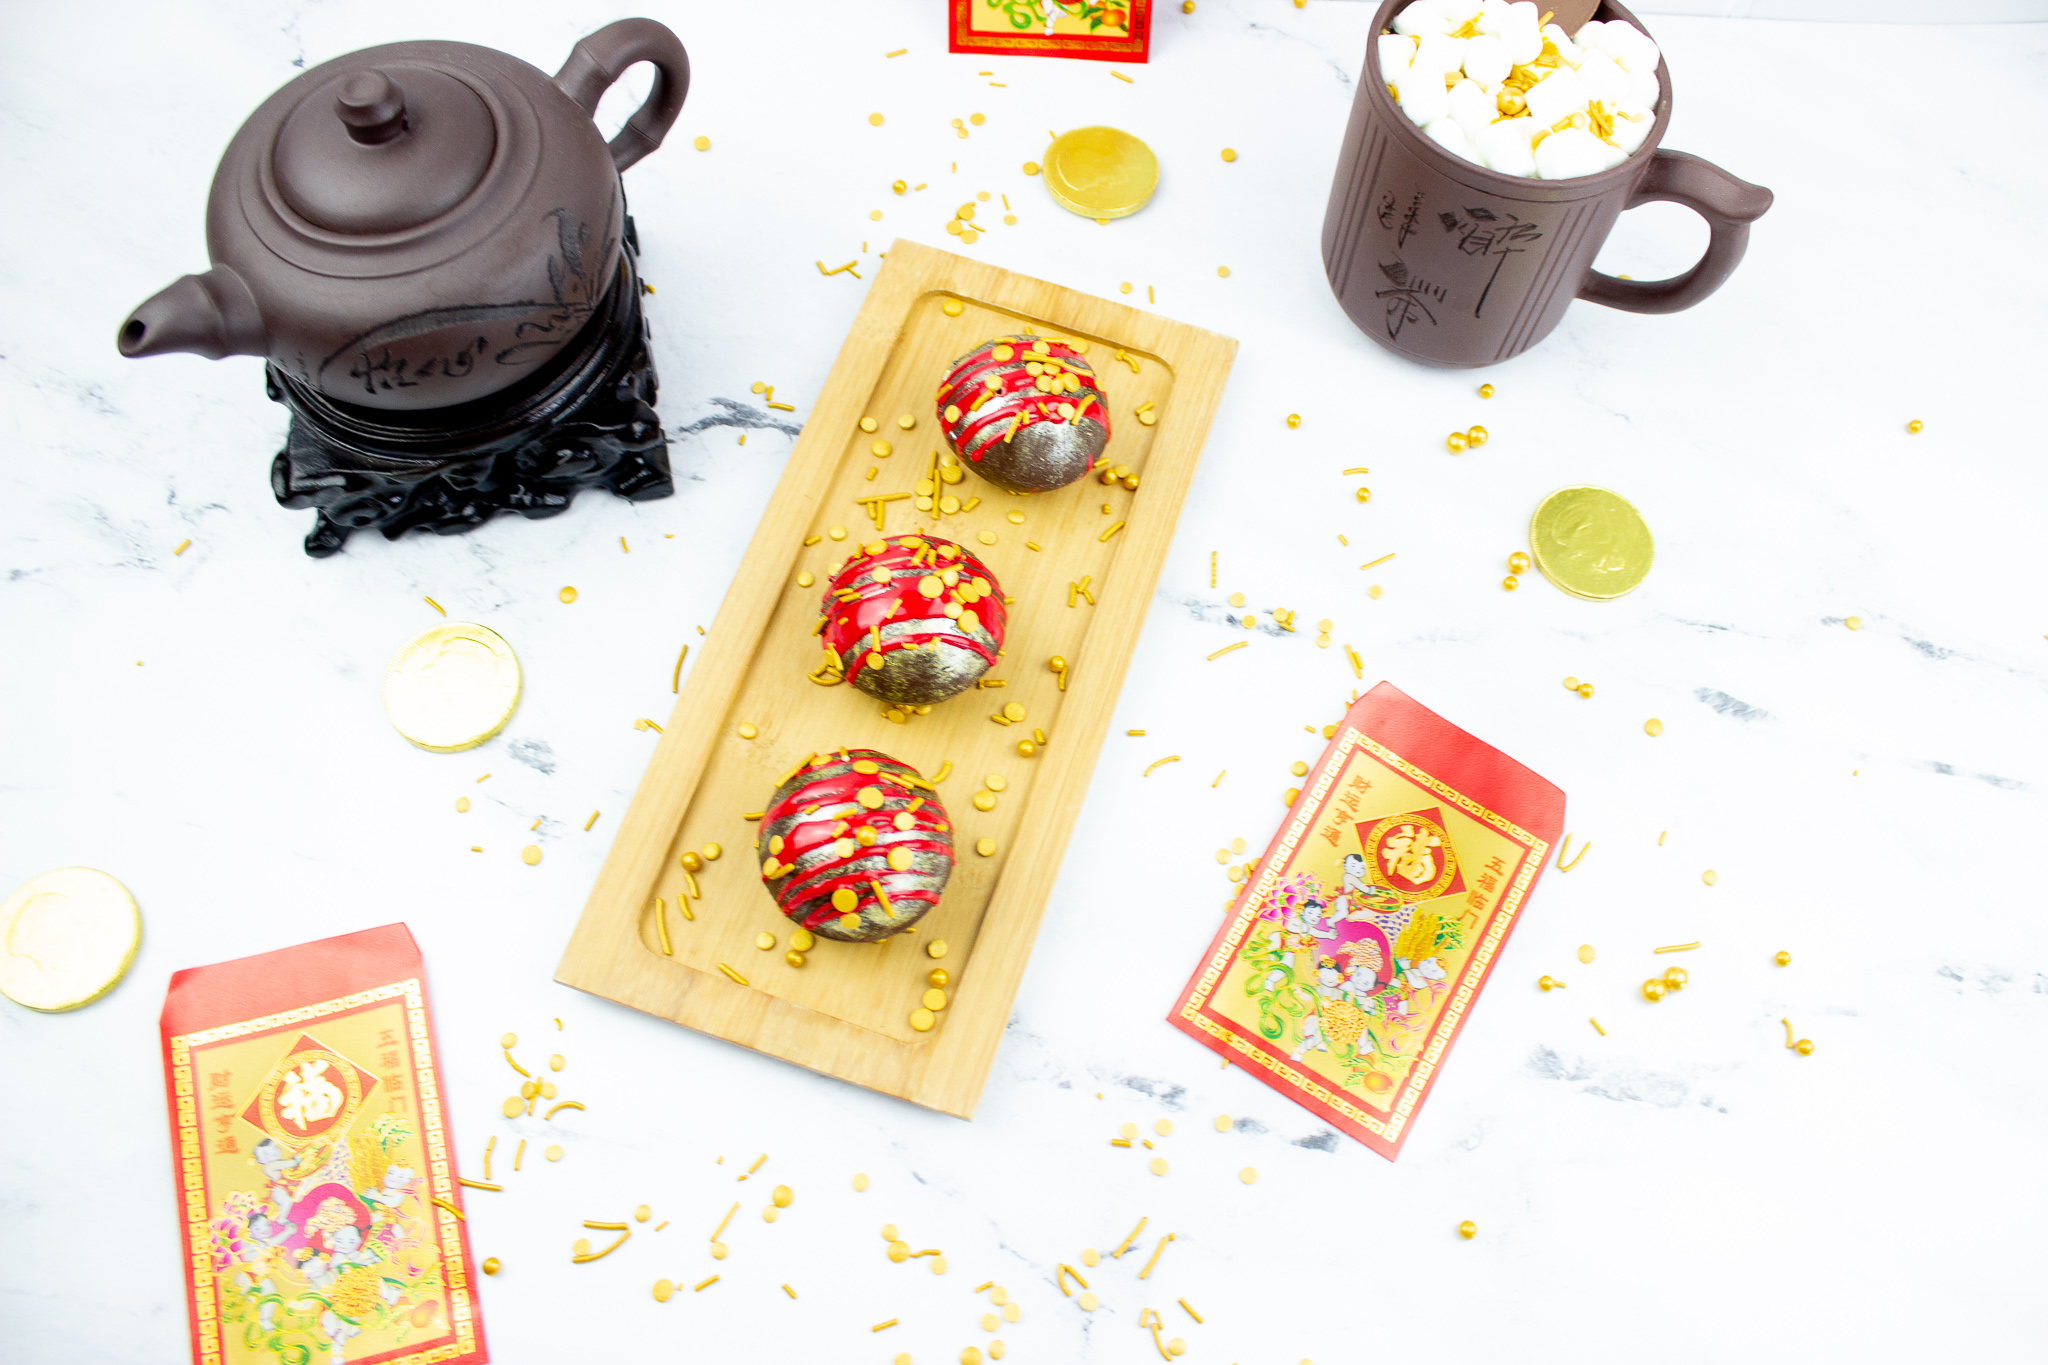 3 Chinese new years hot chocolate bombs on a gold plate